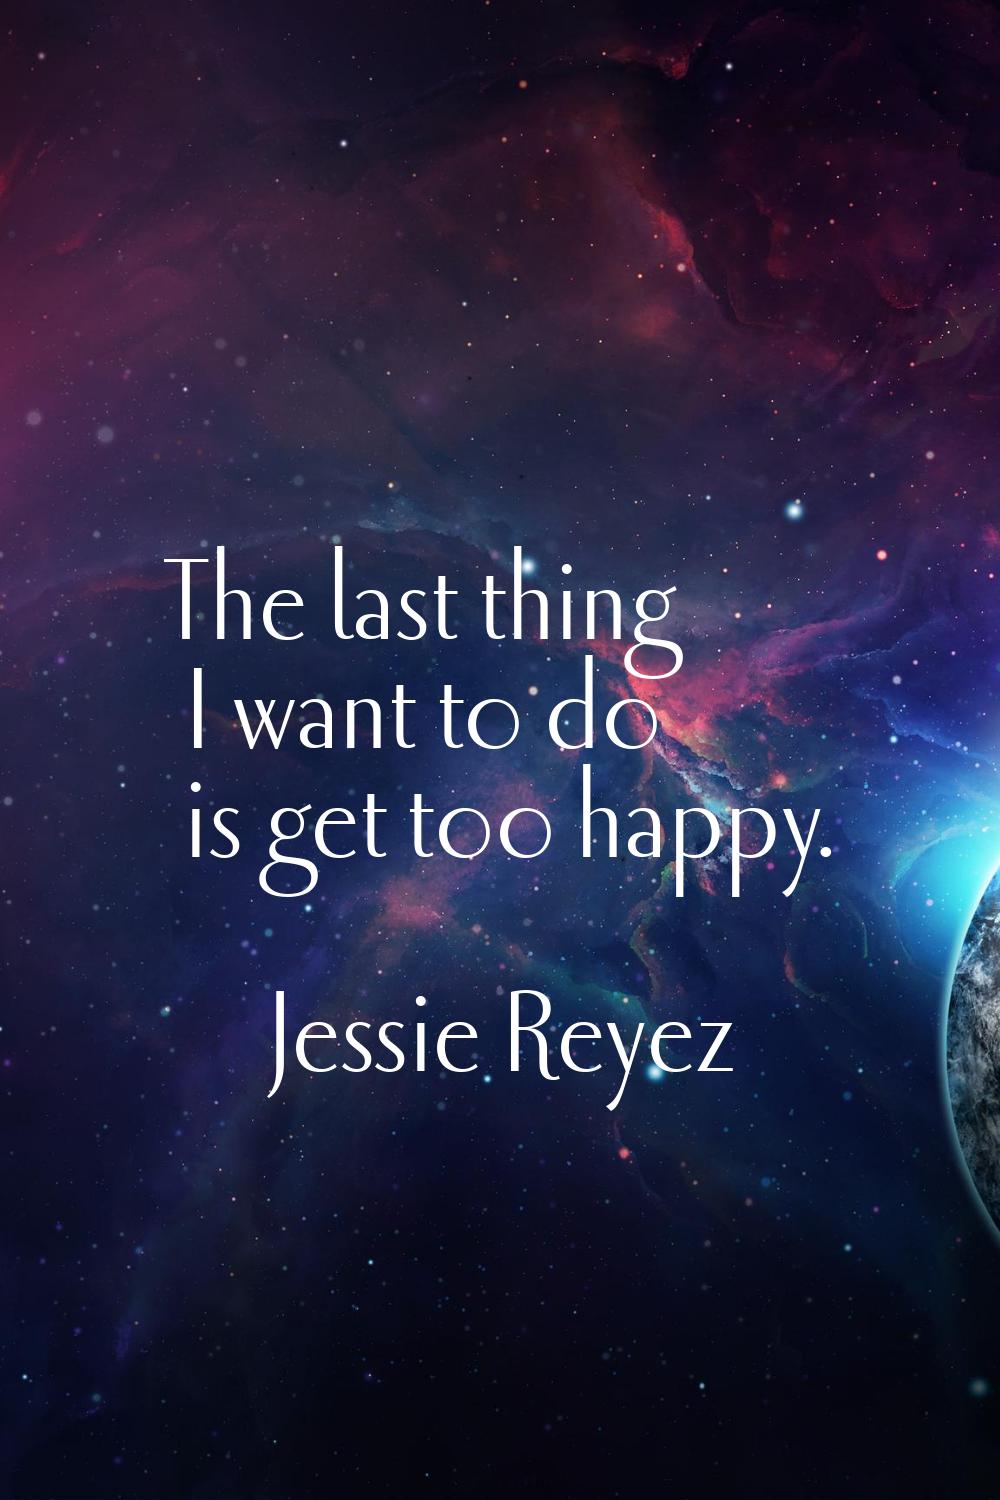 The last thing I want to do is get too happy.